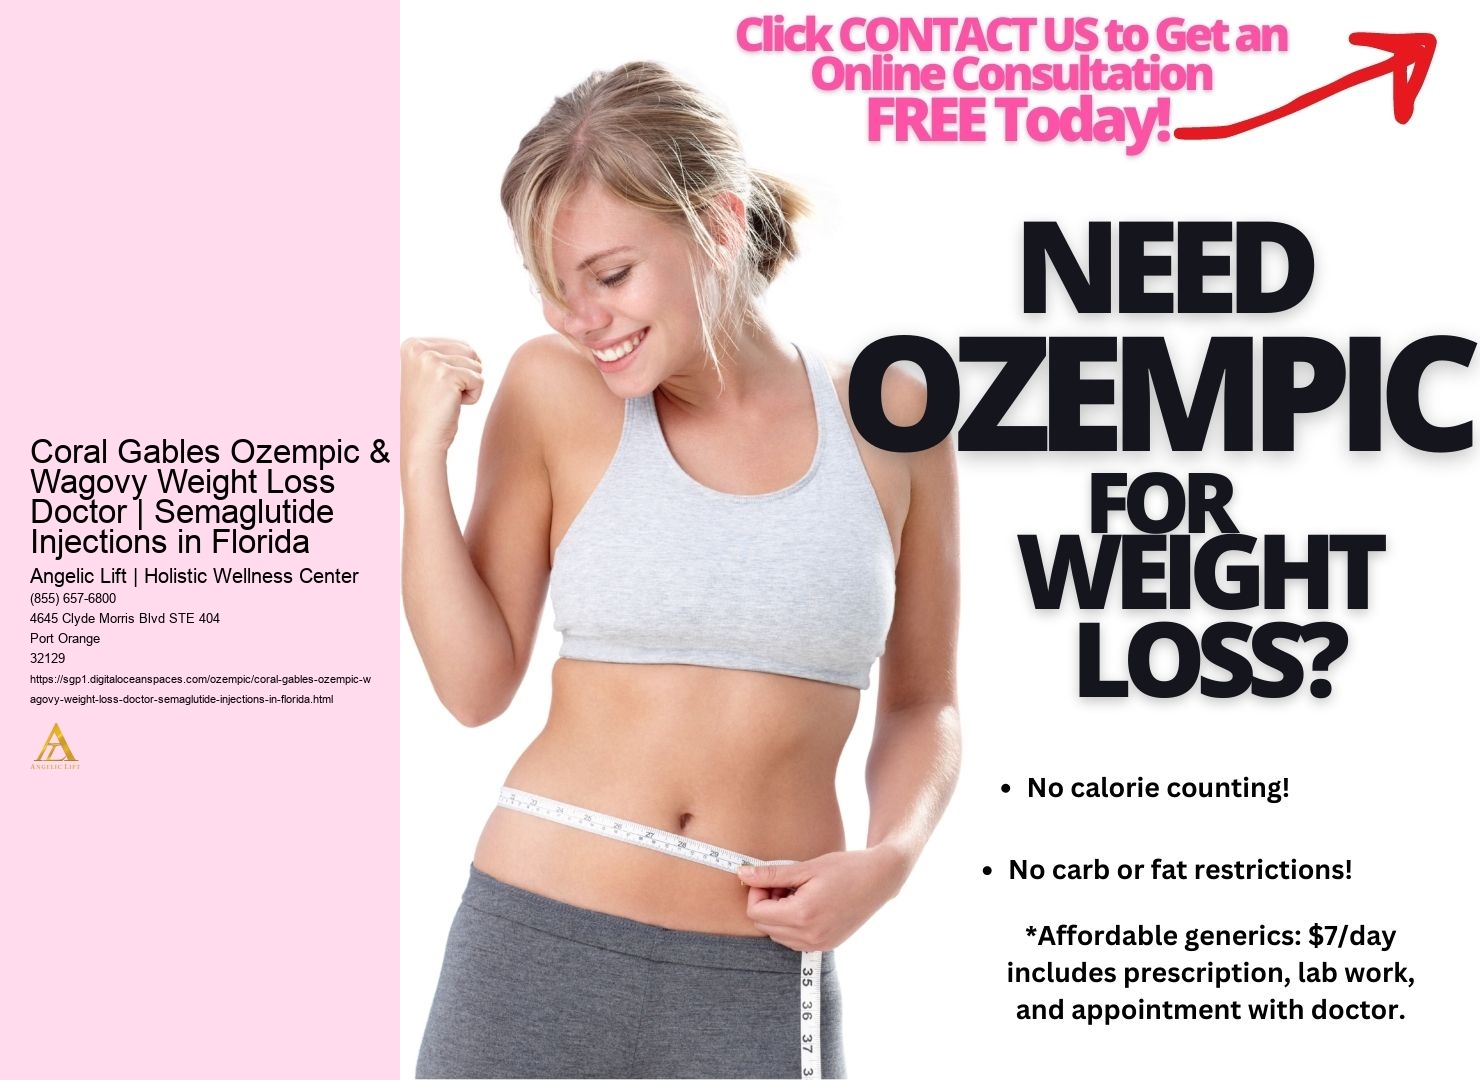 Coral Gables Ozempic & Wagovy Weight Loss Doctor | Semaglutide Injections in Florida